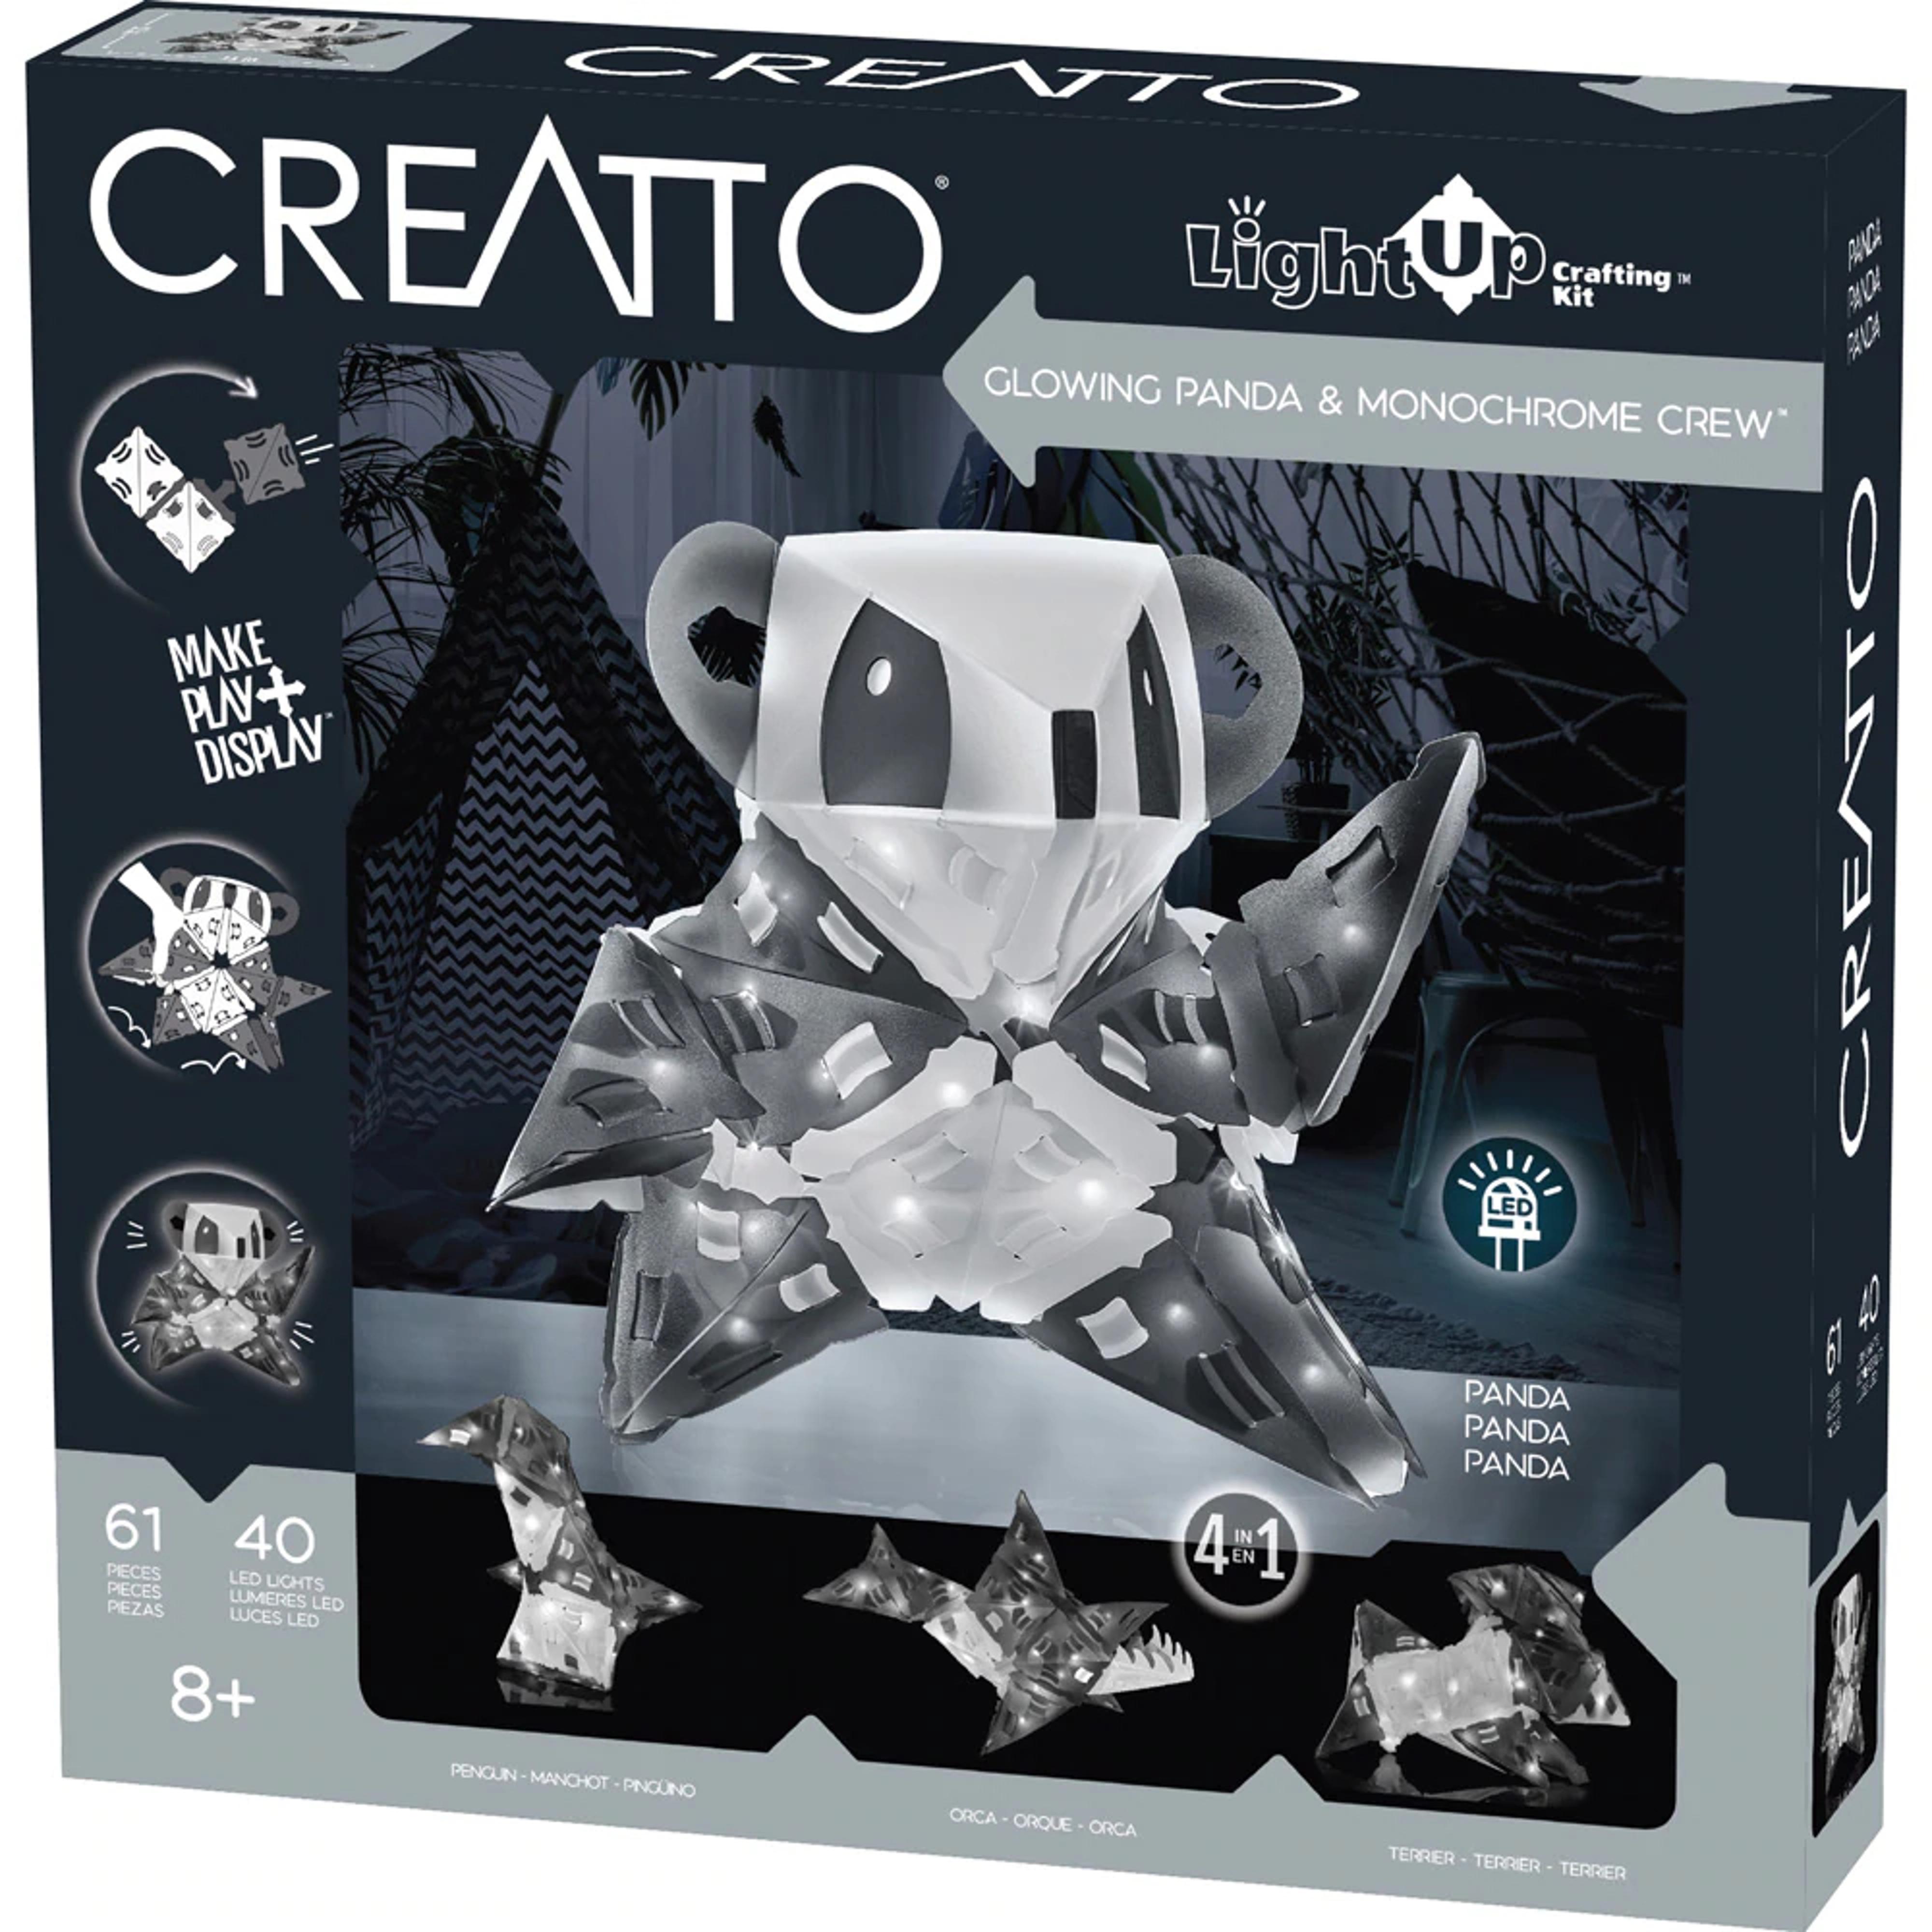 Thames and Kosmos Creatto Glowing Panda and Monochrome Crew Light-Up 3D Puzzle Kit